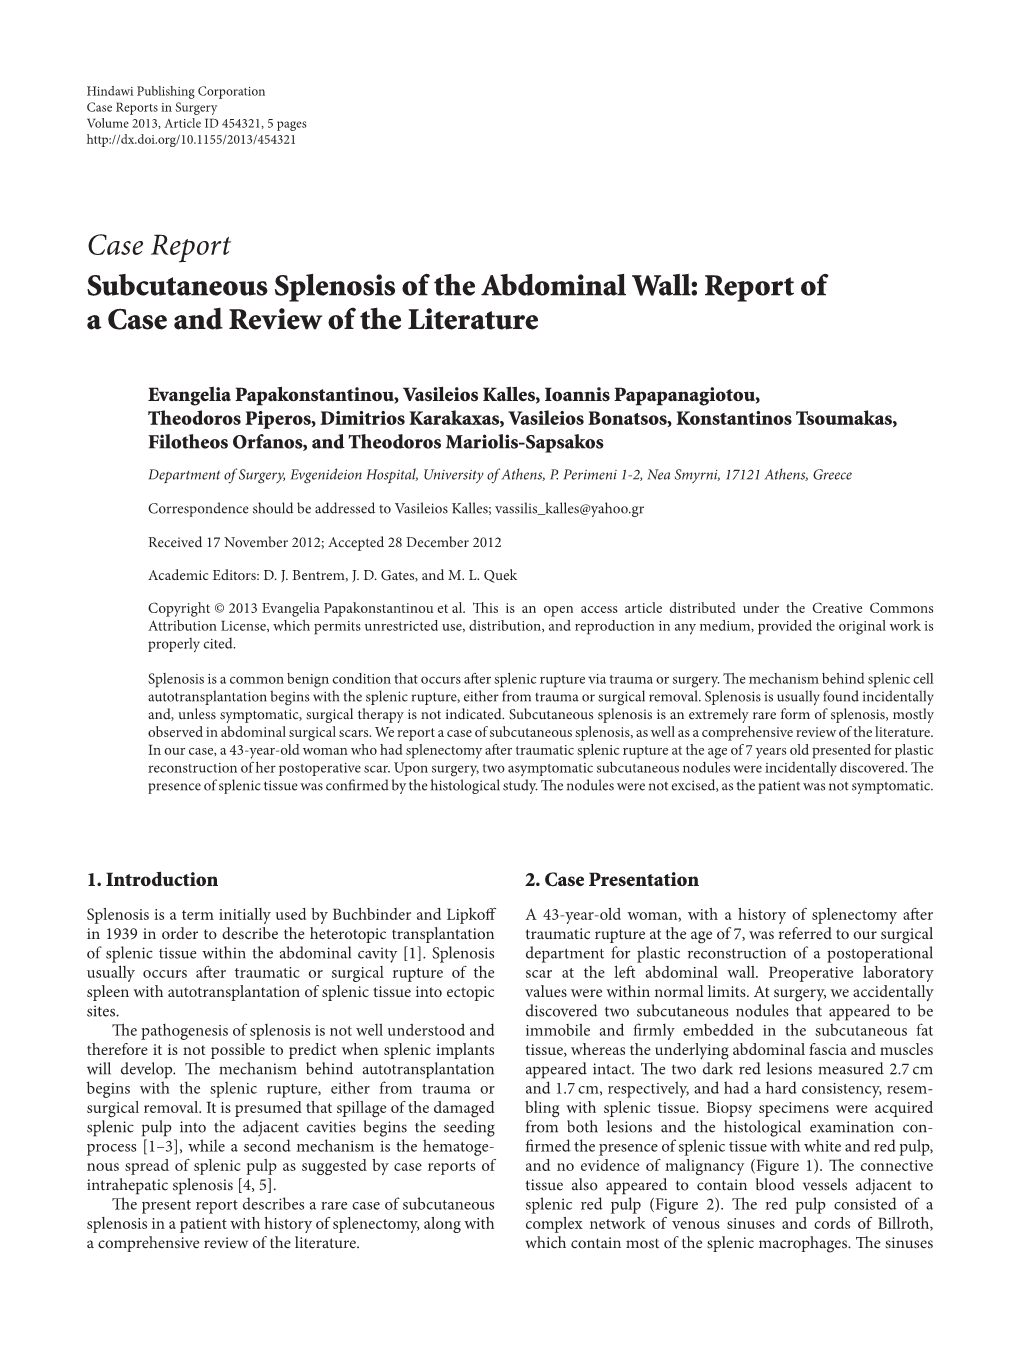 Case Report Subcutaneous Splenosis of the Abdominal Wall: Report of a Case and Review of the Literature